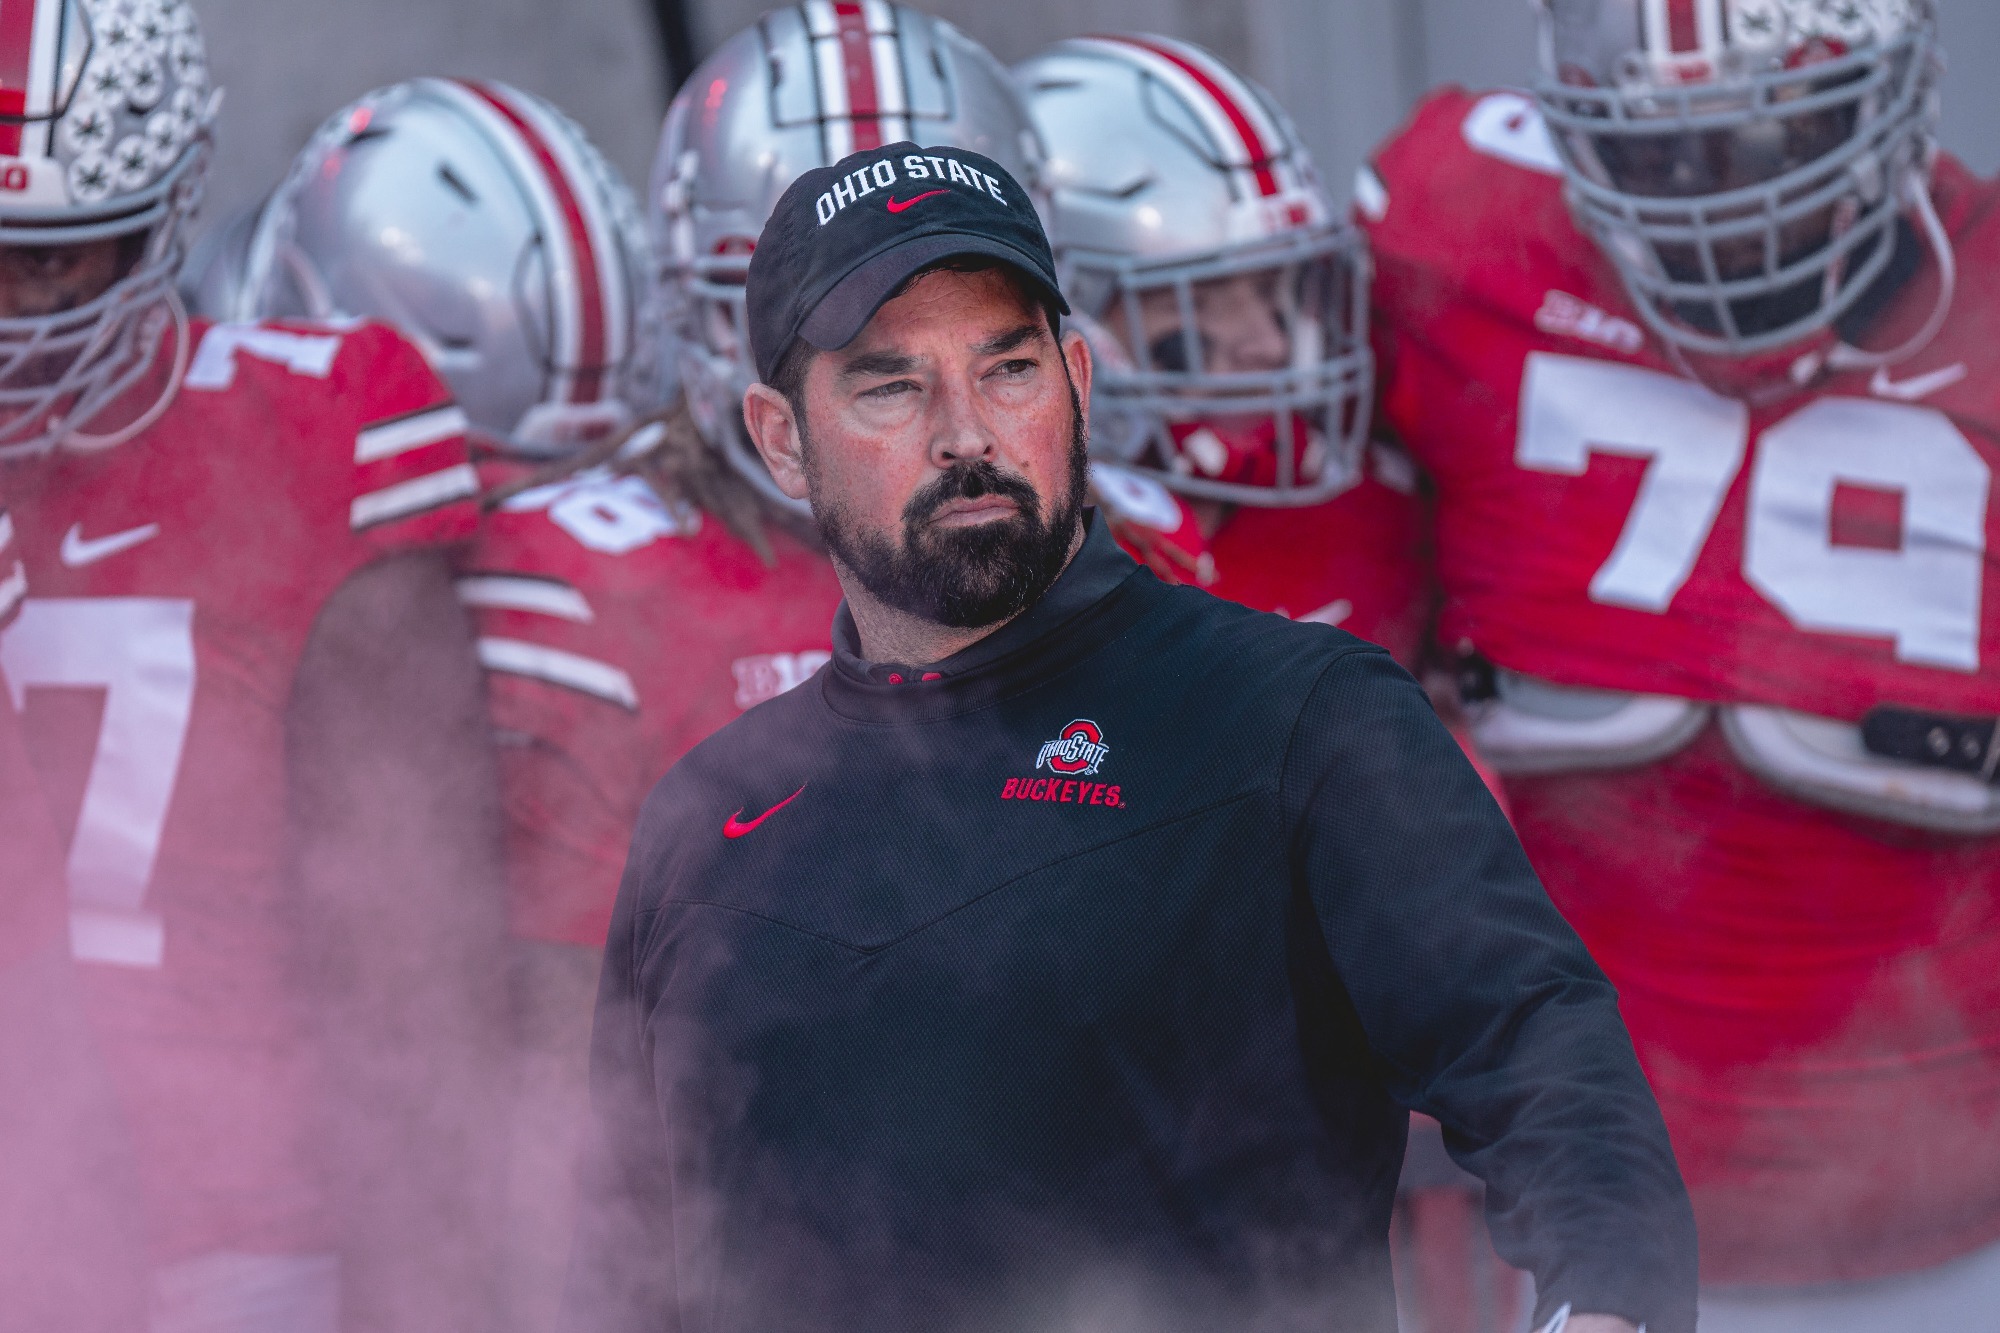 Good news: Ryan Day, the head coach of Ohio State, disclosed that one of his player is…….